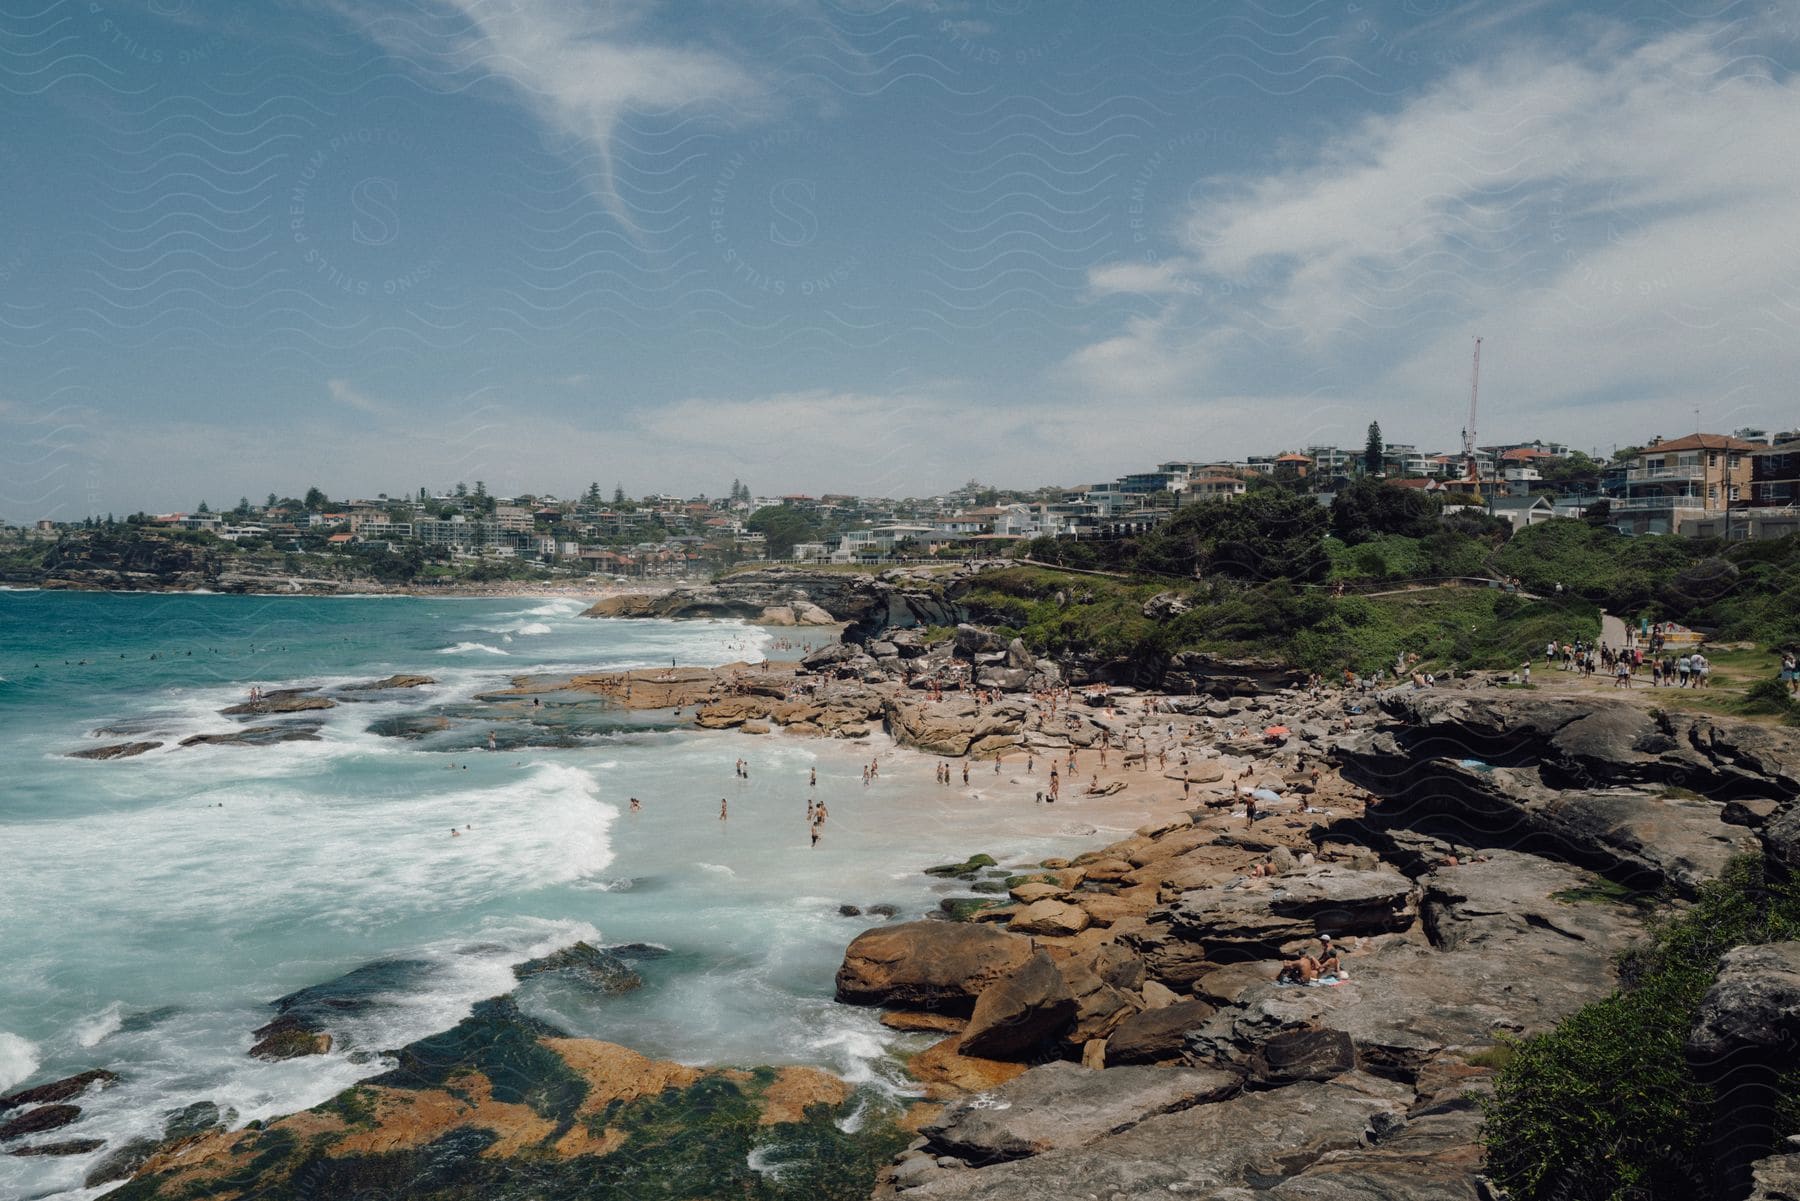 Panorama of a beach with rocky coastline with sunbathers on a summer day